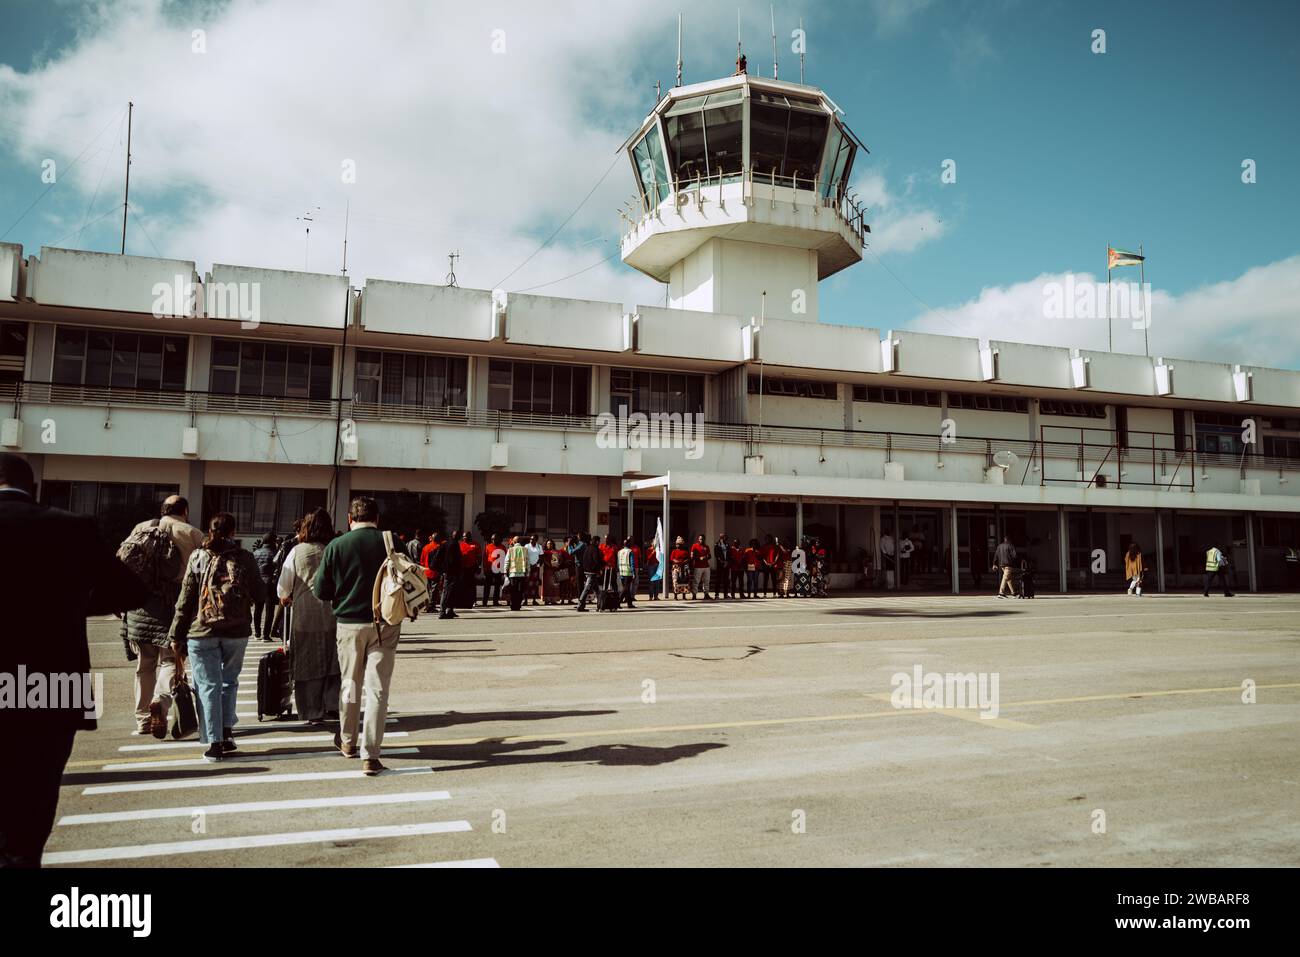 A group of people against Nampula International Airport in Mozambique Stock Photo